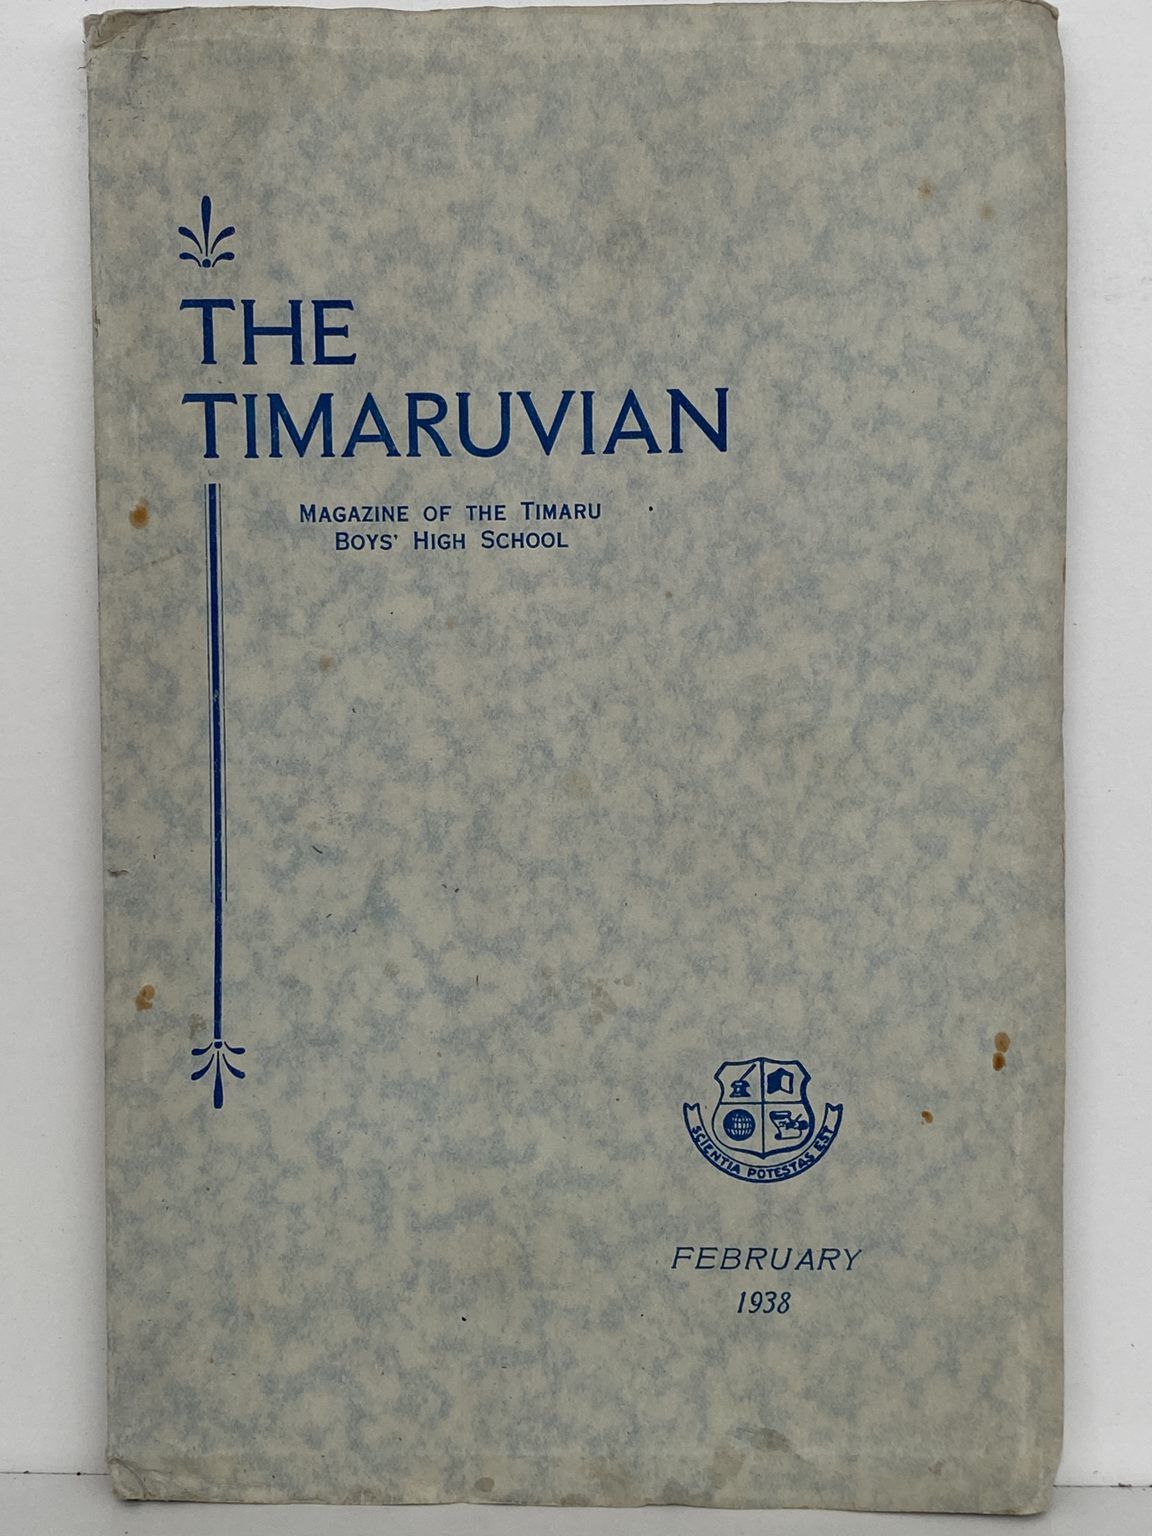 THE TIMARUVIAN: Magazine of the Timaru Boys' High School and its Old Boys' Association 1938